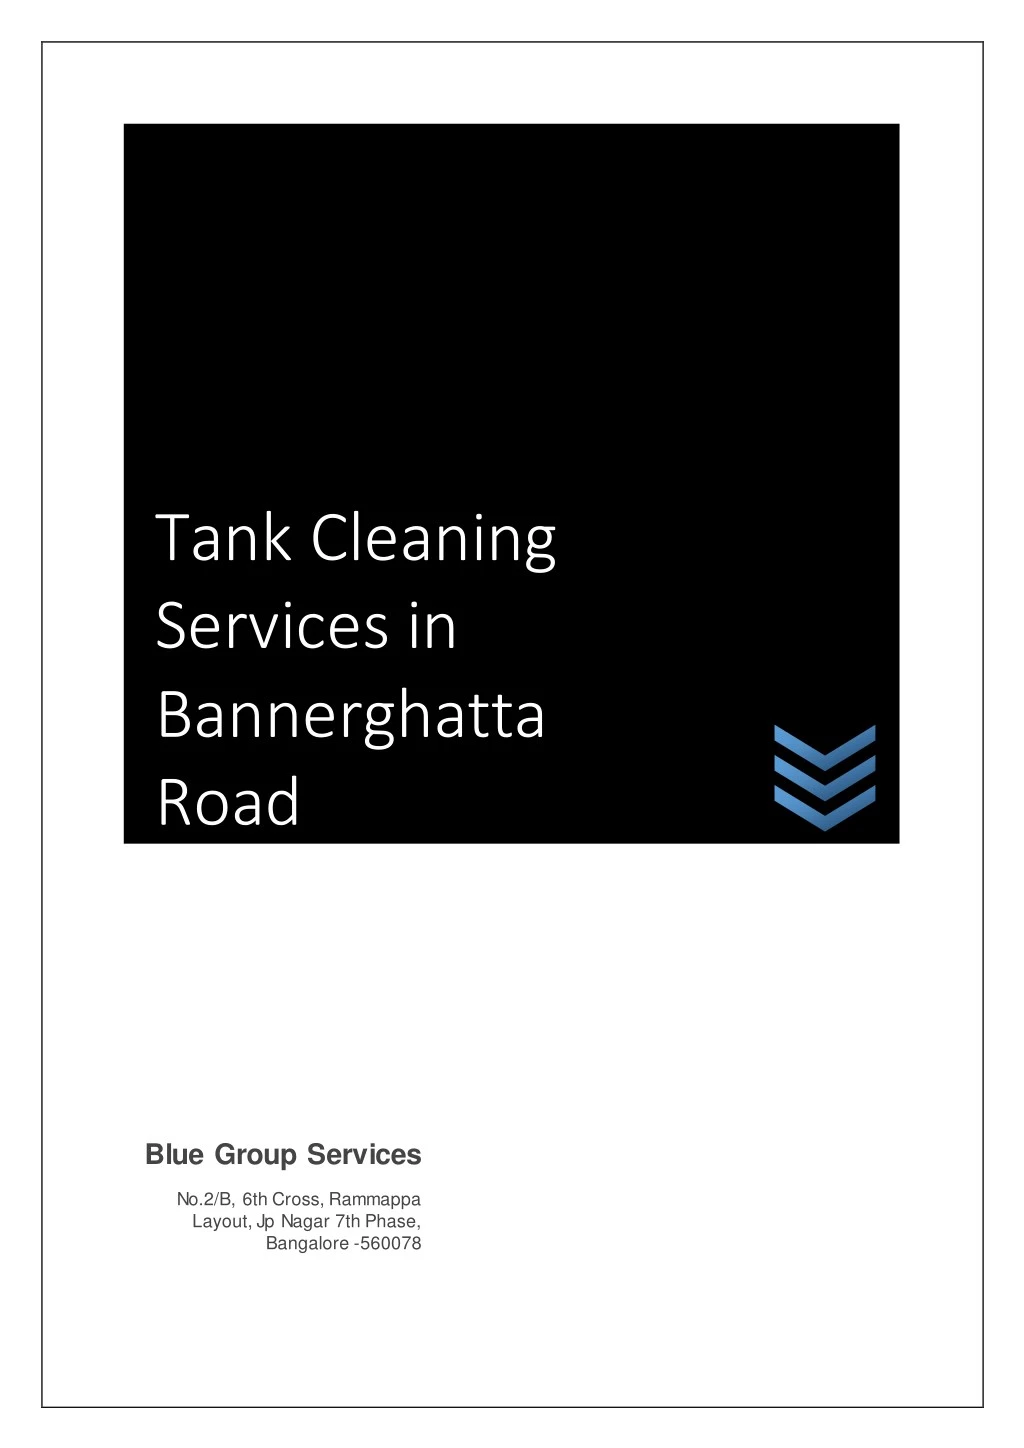 tank cleaning services in bannerghatta road